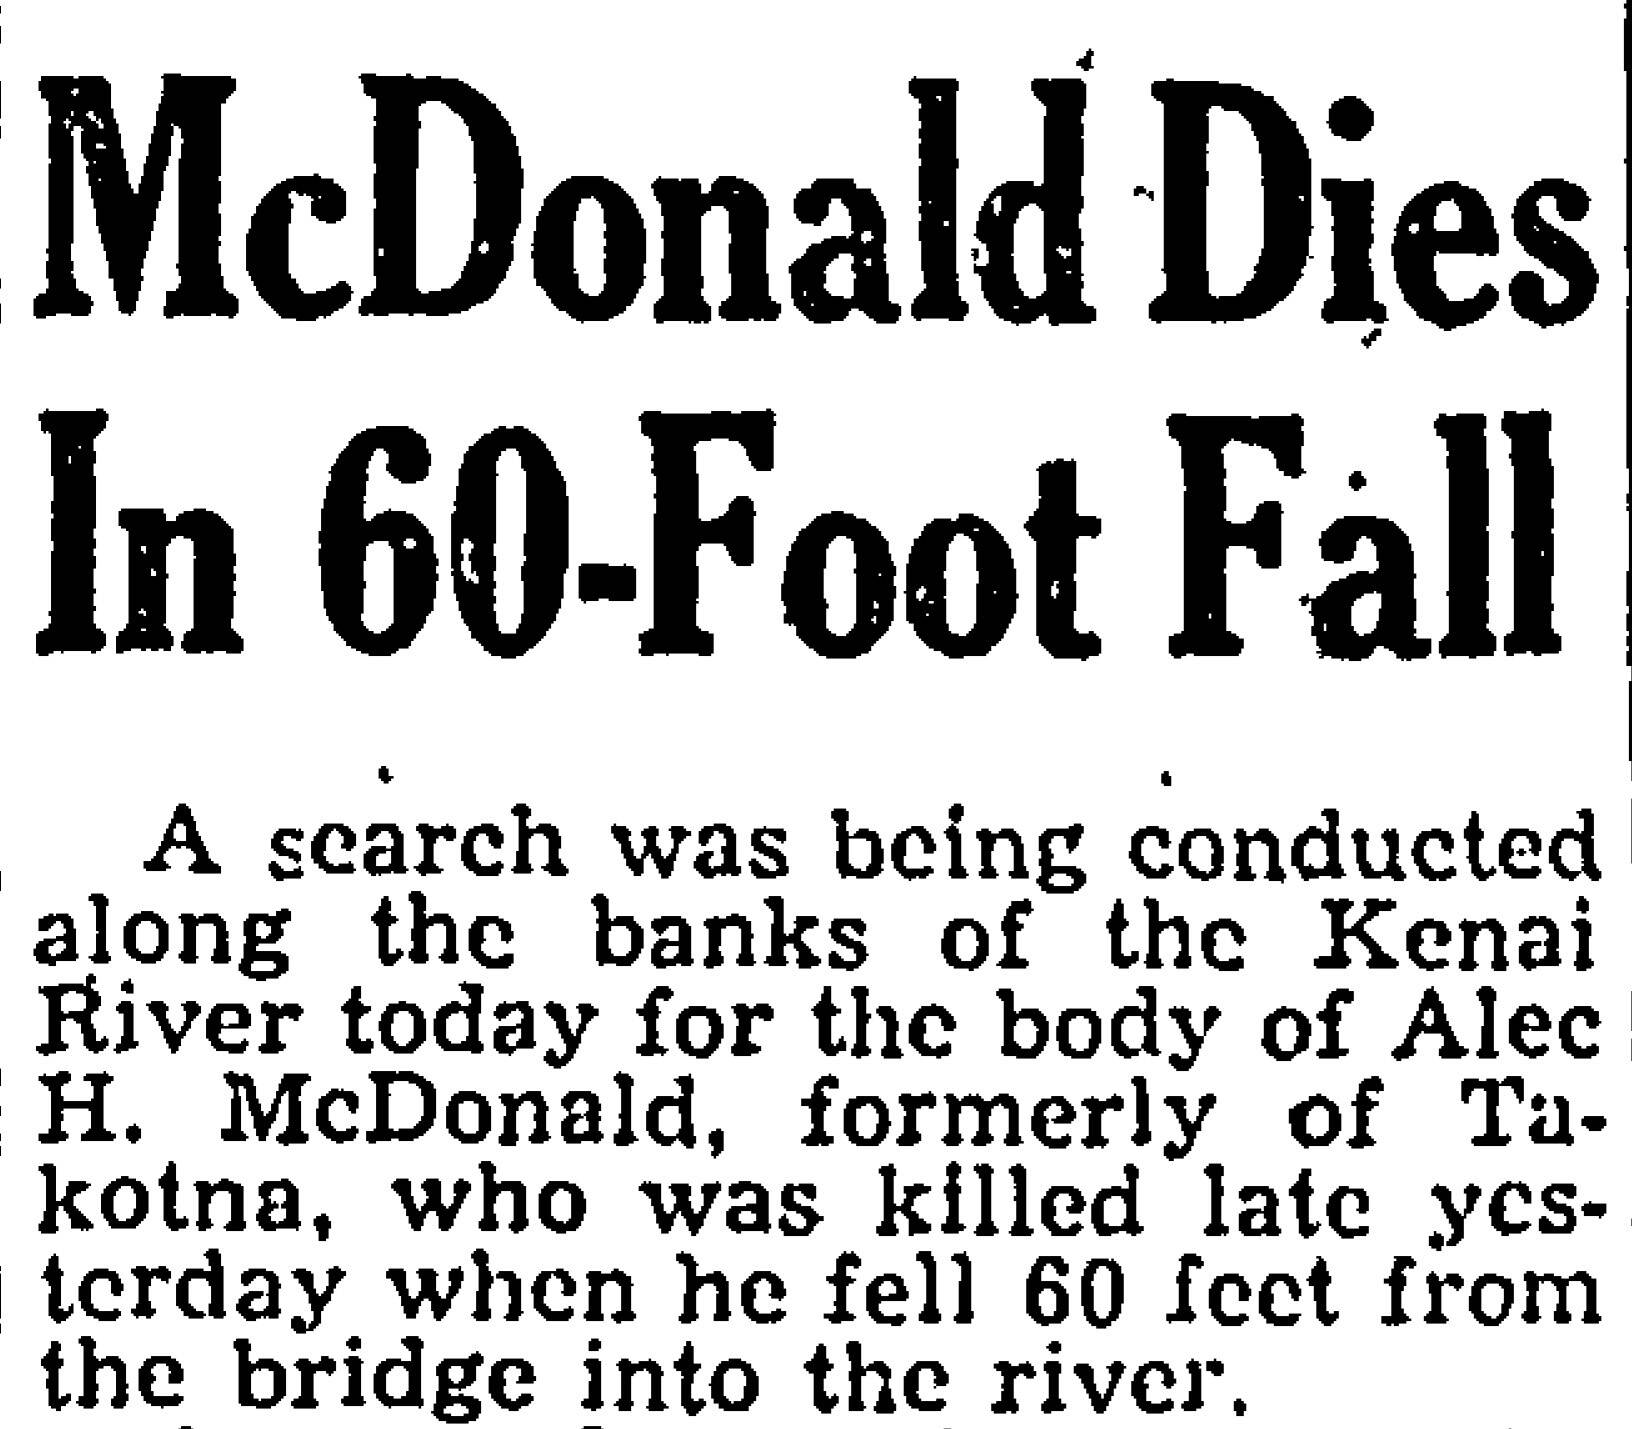 On May 5, 1948, the Alaska Road Commission employee known as Doc MacDonald fell from his worksite into the Kenai River and drowned. He was the only casualty suffered during the construction of the Sterling Highway.